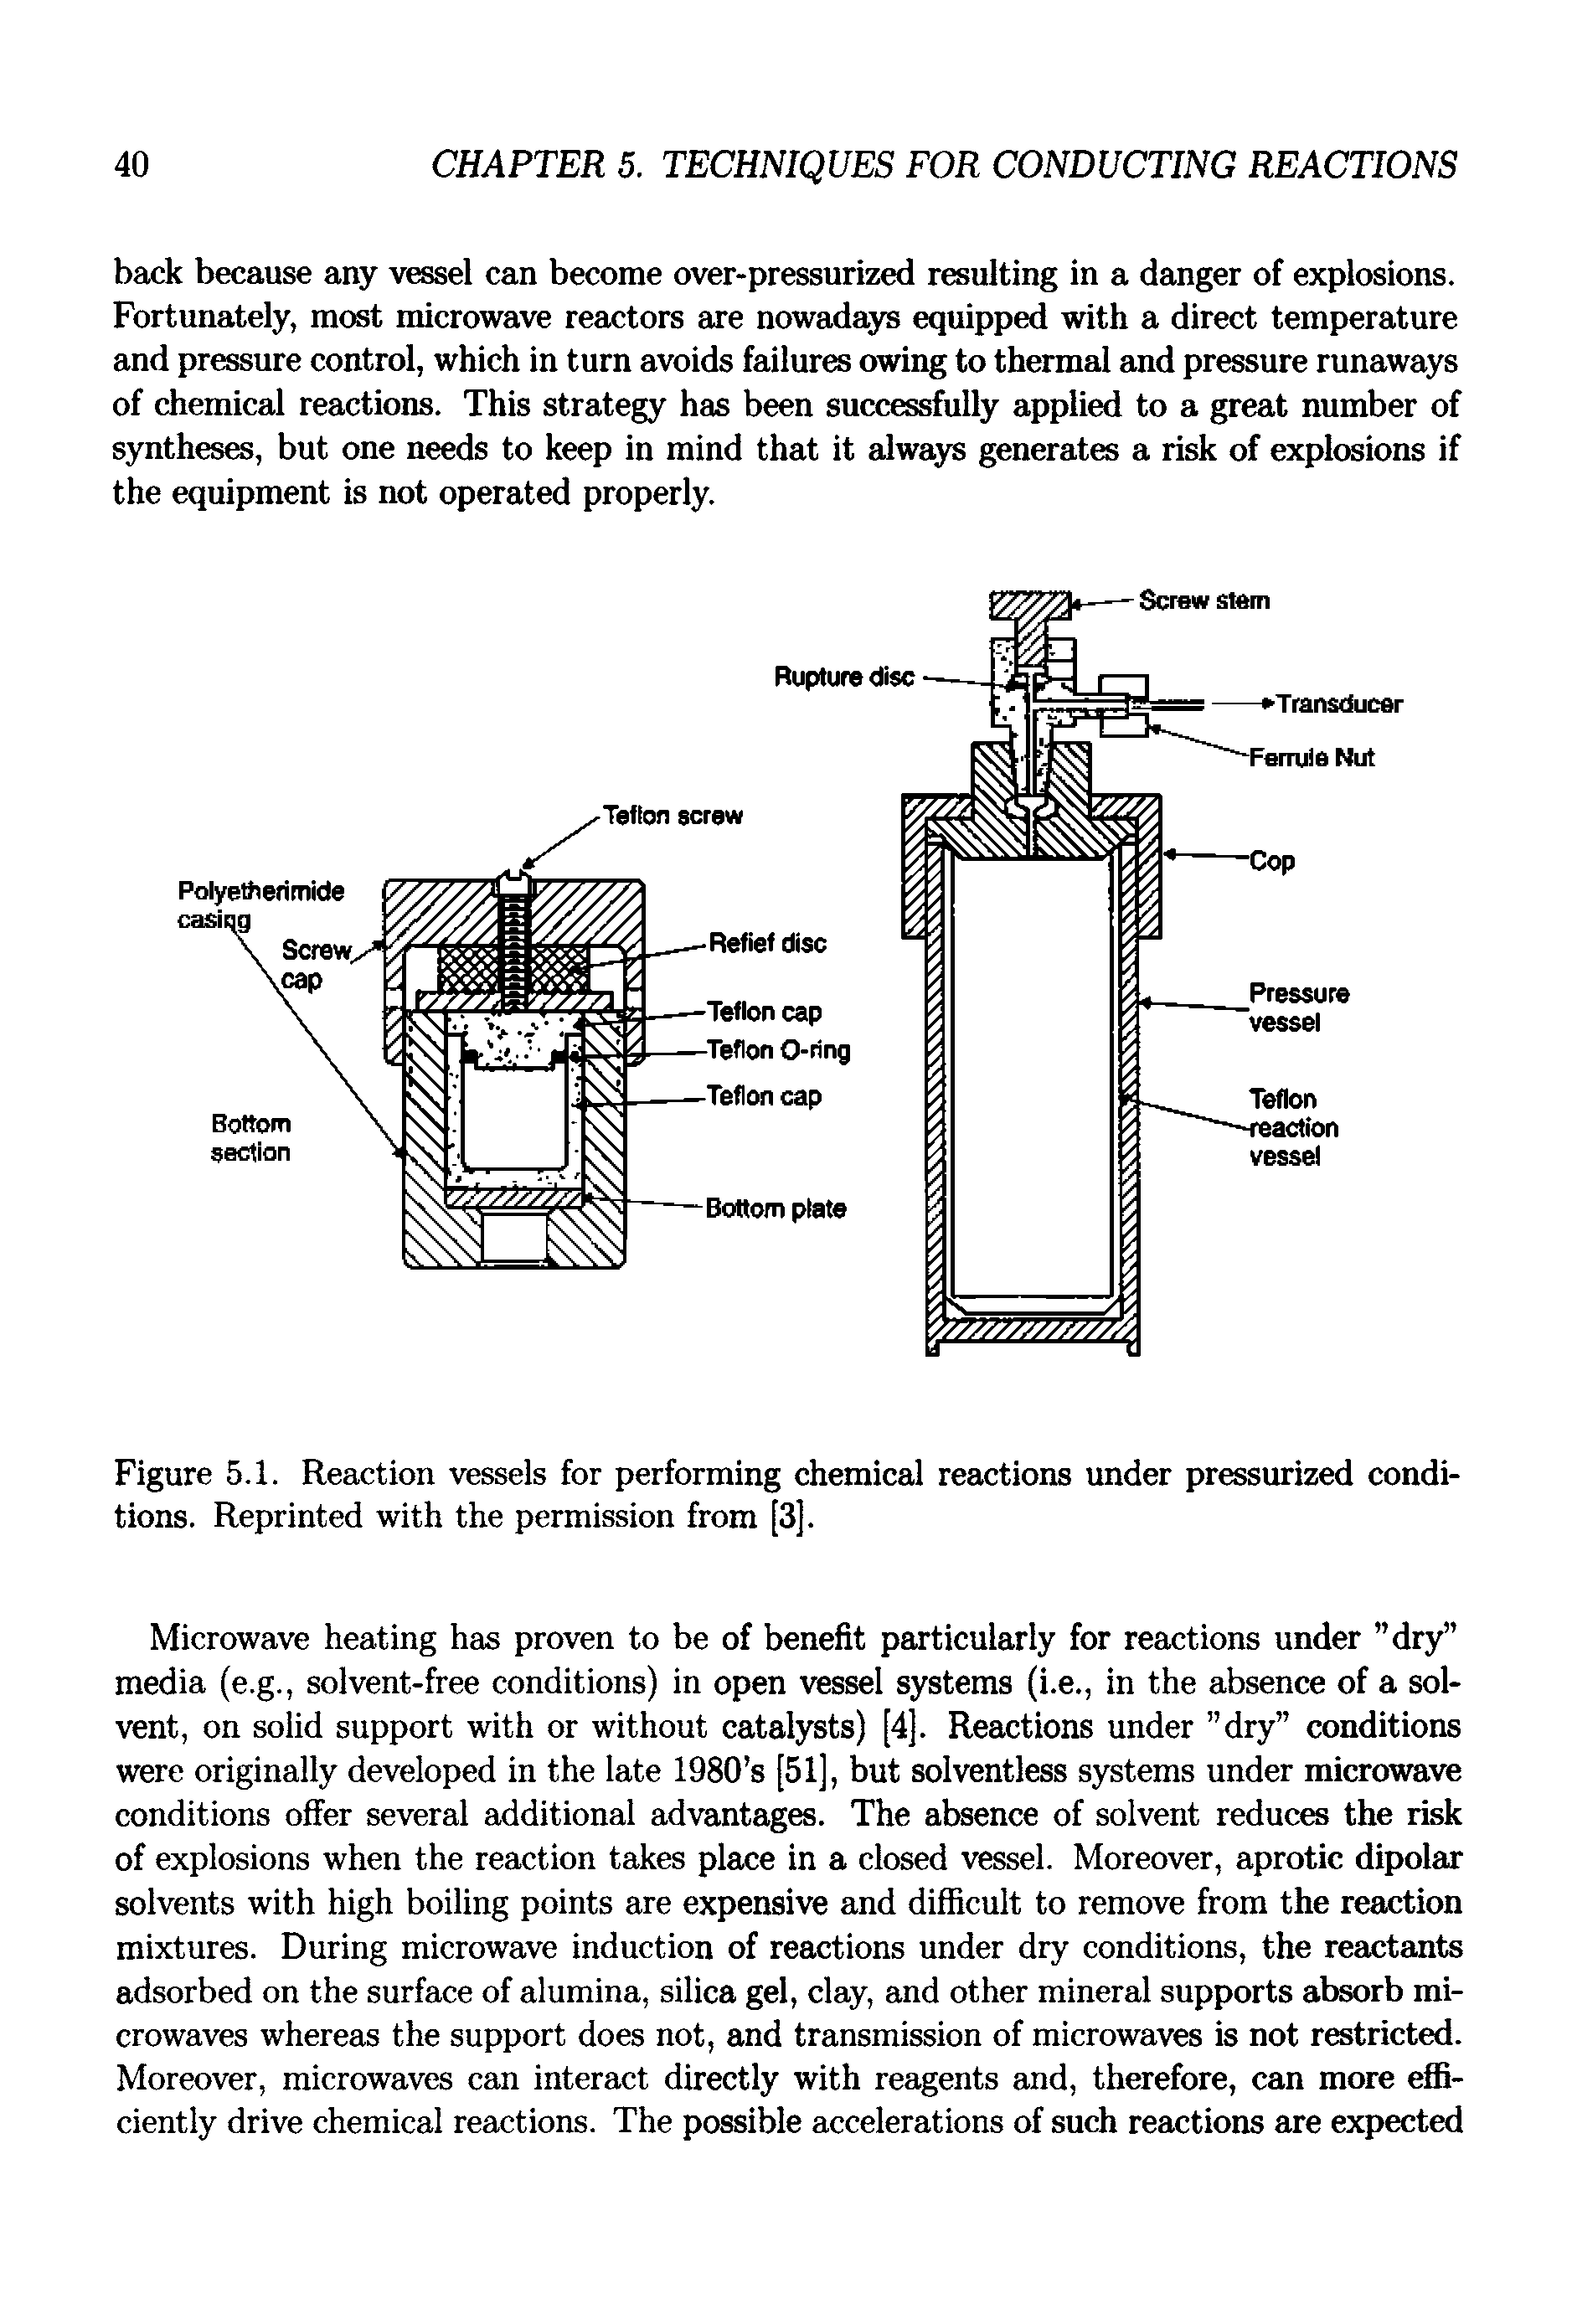 Figure 5.1. Reaction vessels for performing chemical reactions under pressurized conditions. Reprinted with the permission from [3].